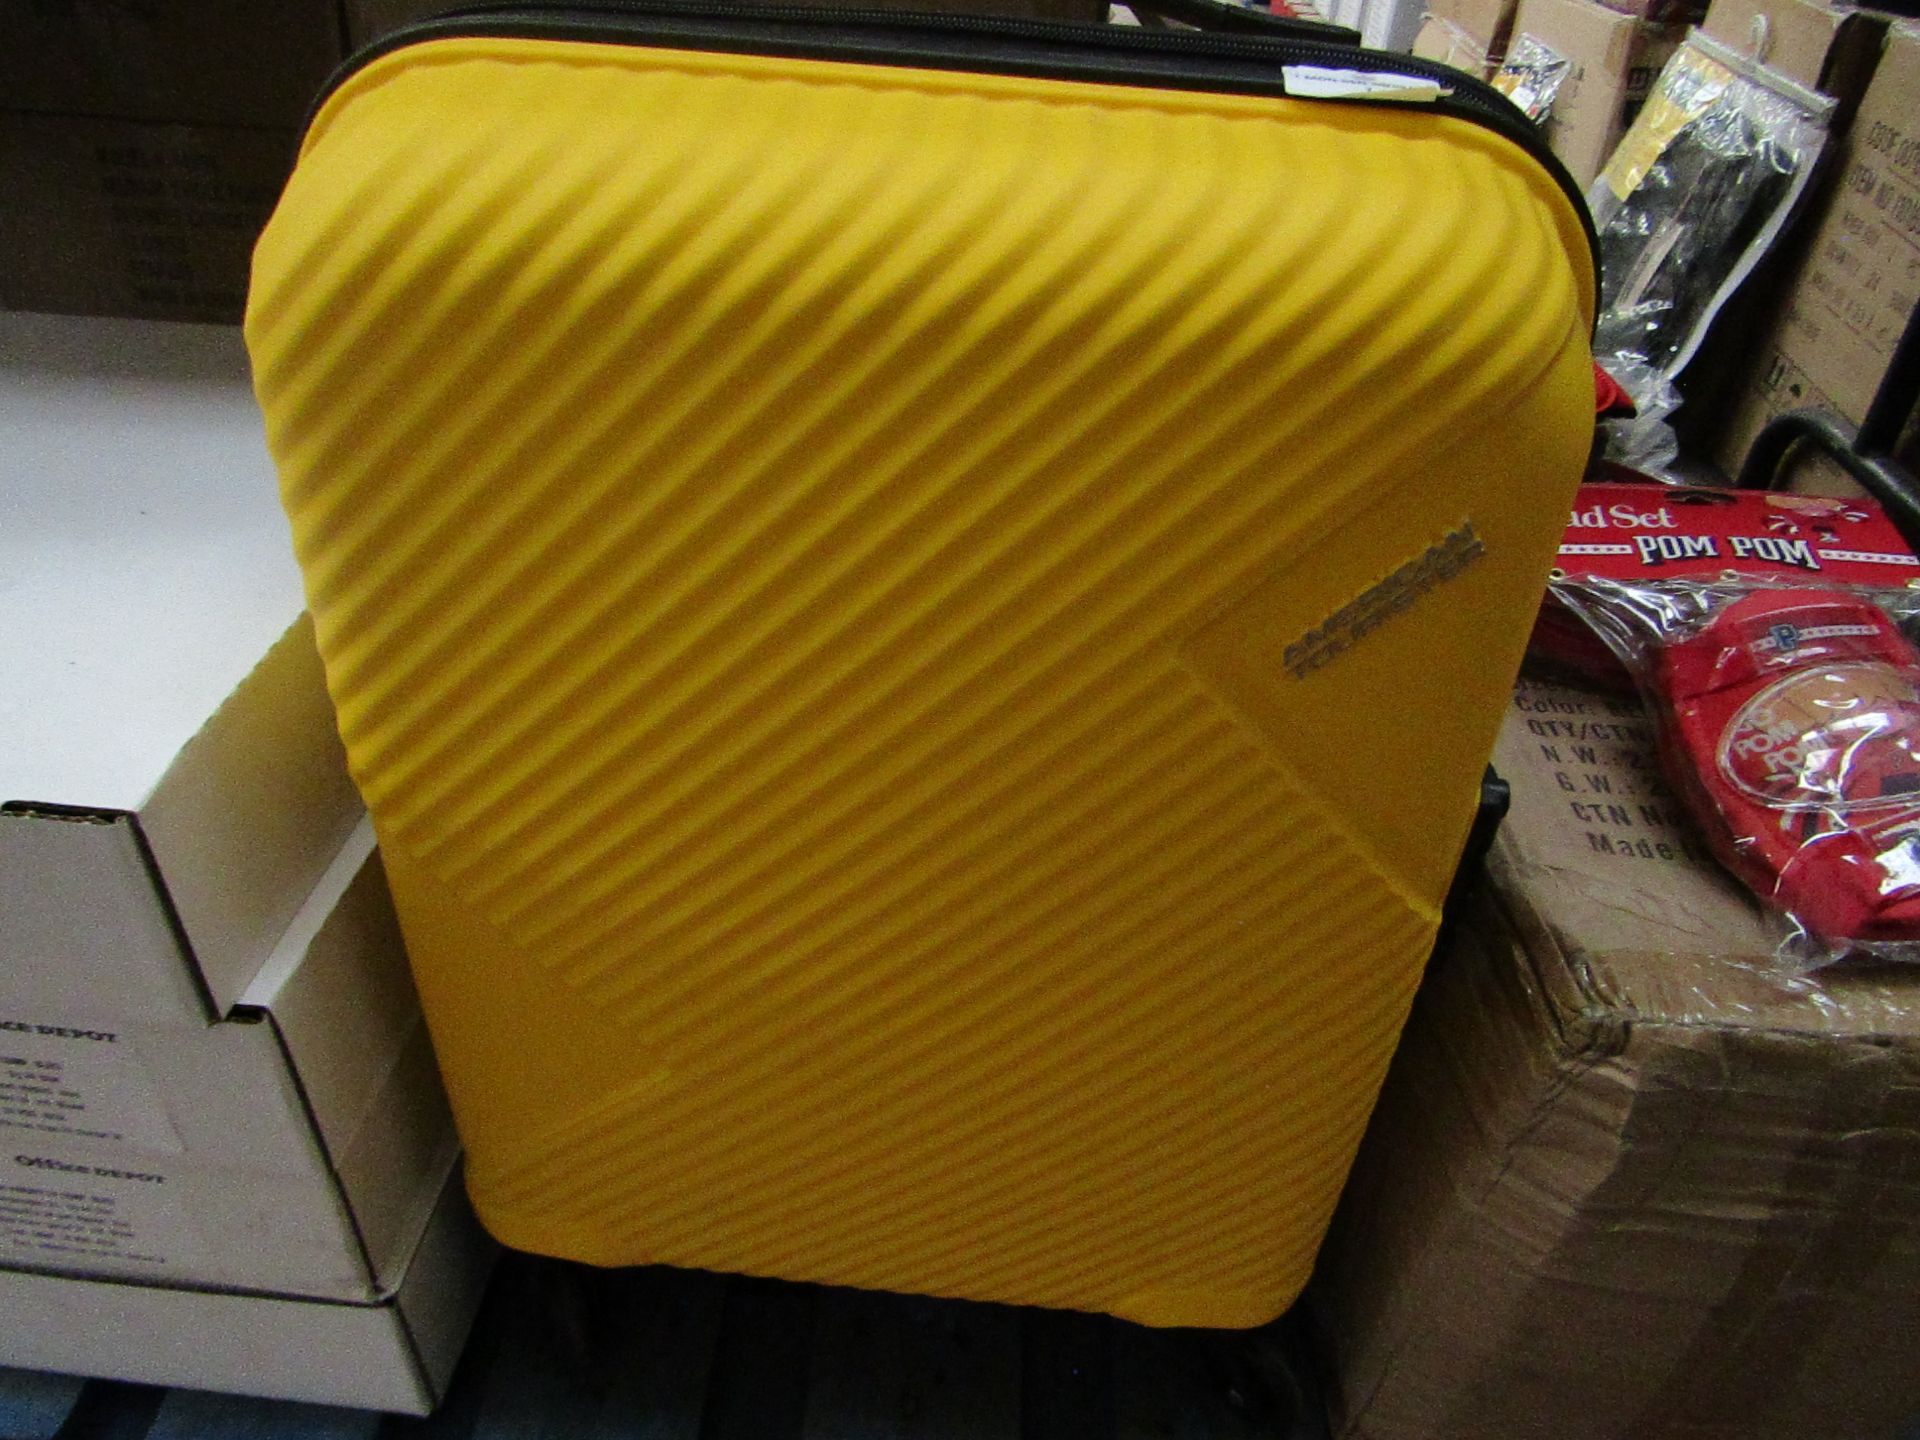 American Tourist - Zakk Carry on Hardside Spinner Case - Yellow - Good Condition, No Visible Damages